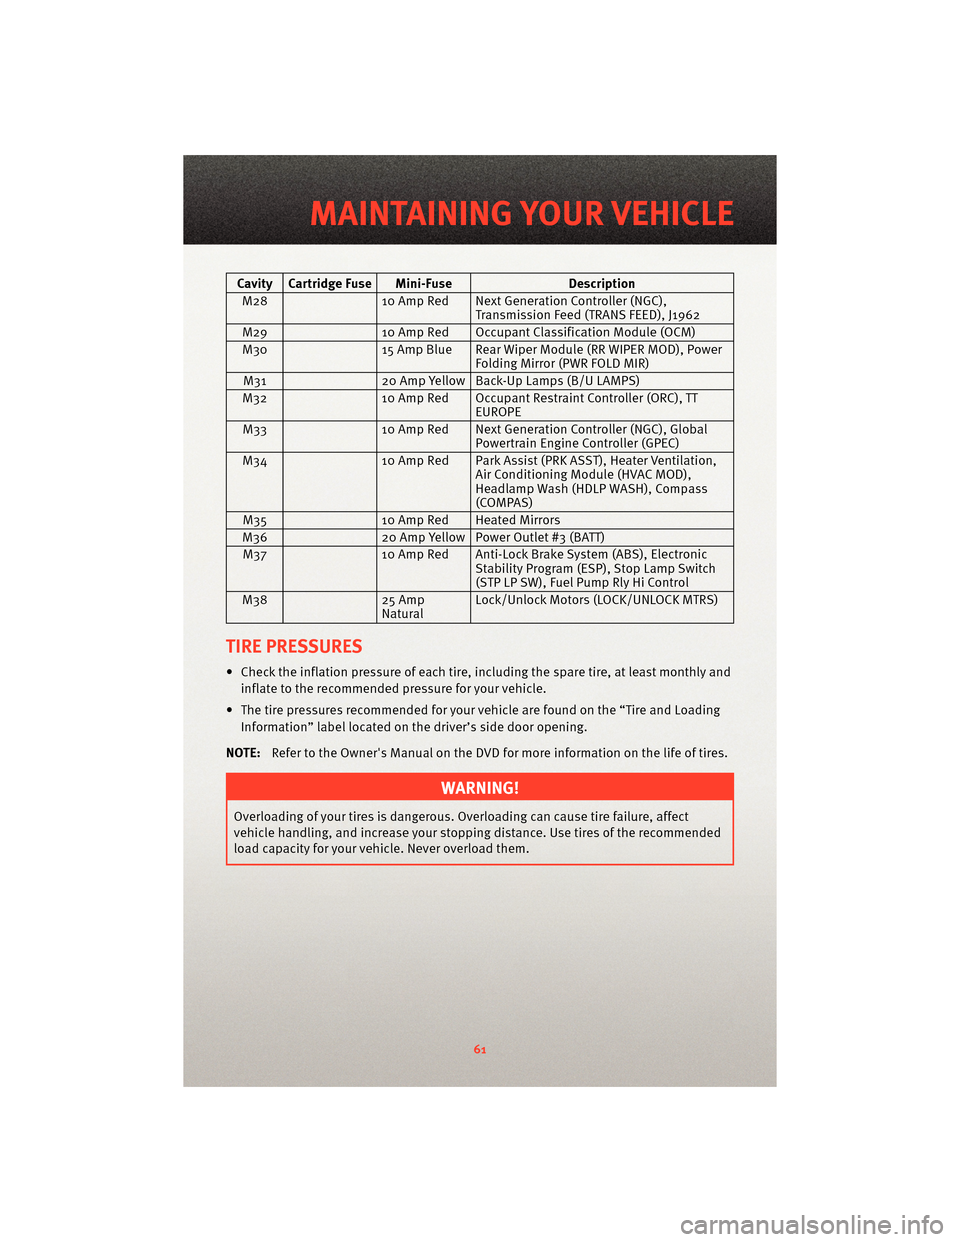 DODGE NITRO 2010 1.G Owners Manual Cavity Cartridge Fuse Mini-FuseDescription
M28 10 Amp Red Next Generation Controller (NGC),
Transmission Feed (TRANS FEED), J1962
M29 10 Amp Red Occupant Classification Module (OCM)
M30 15 Amp Blue Re